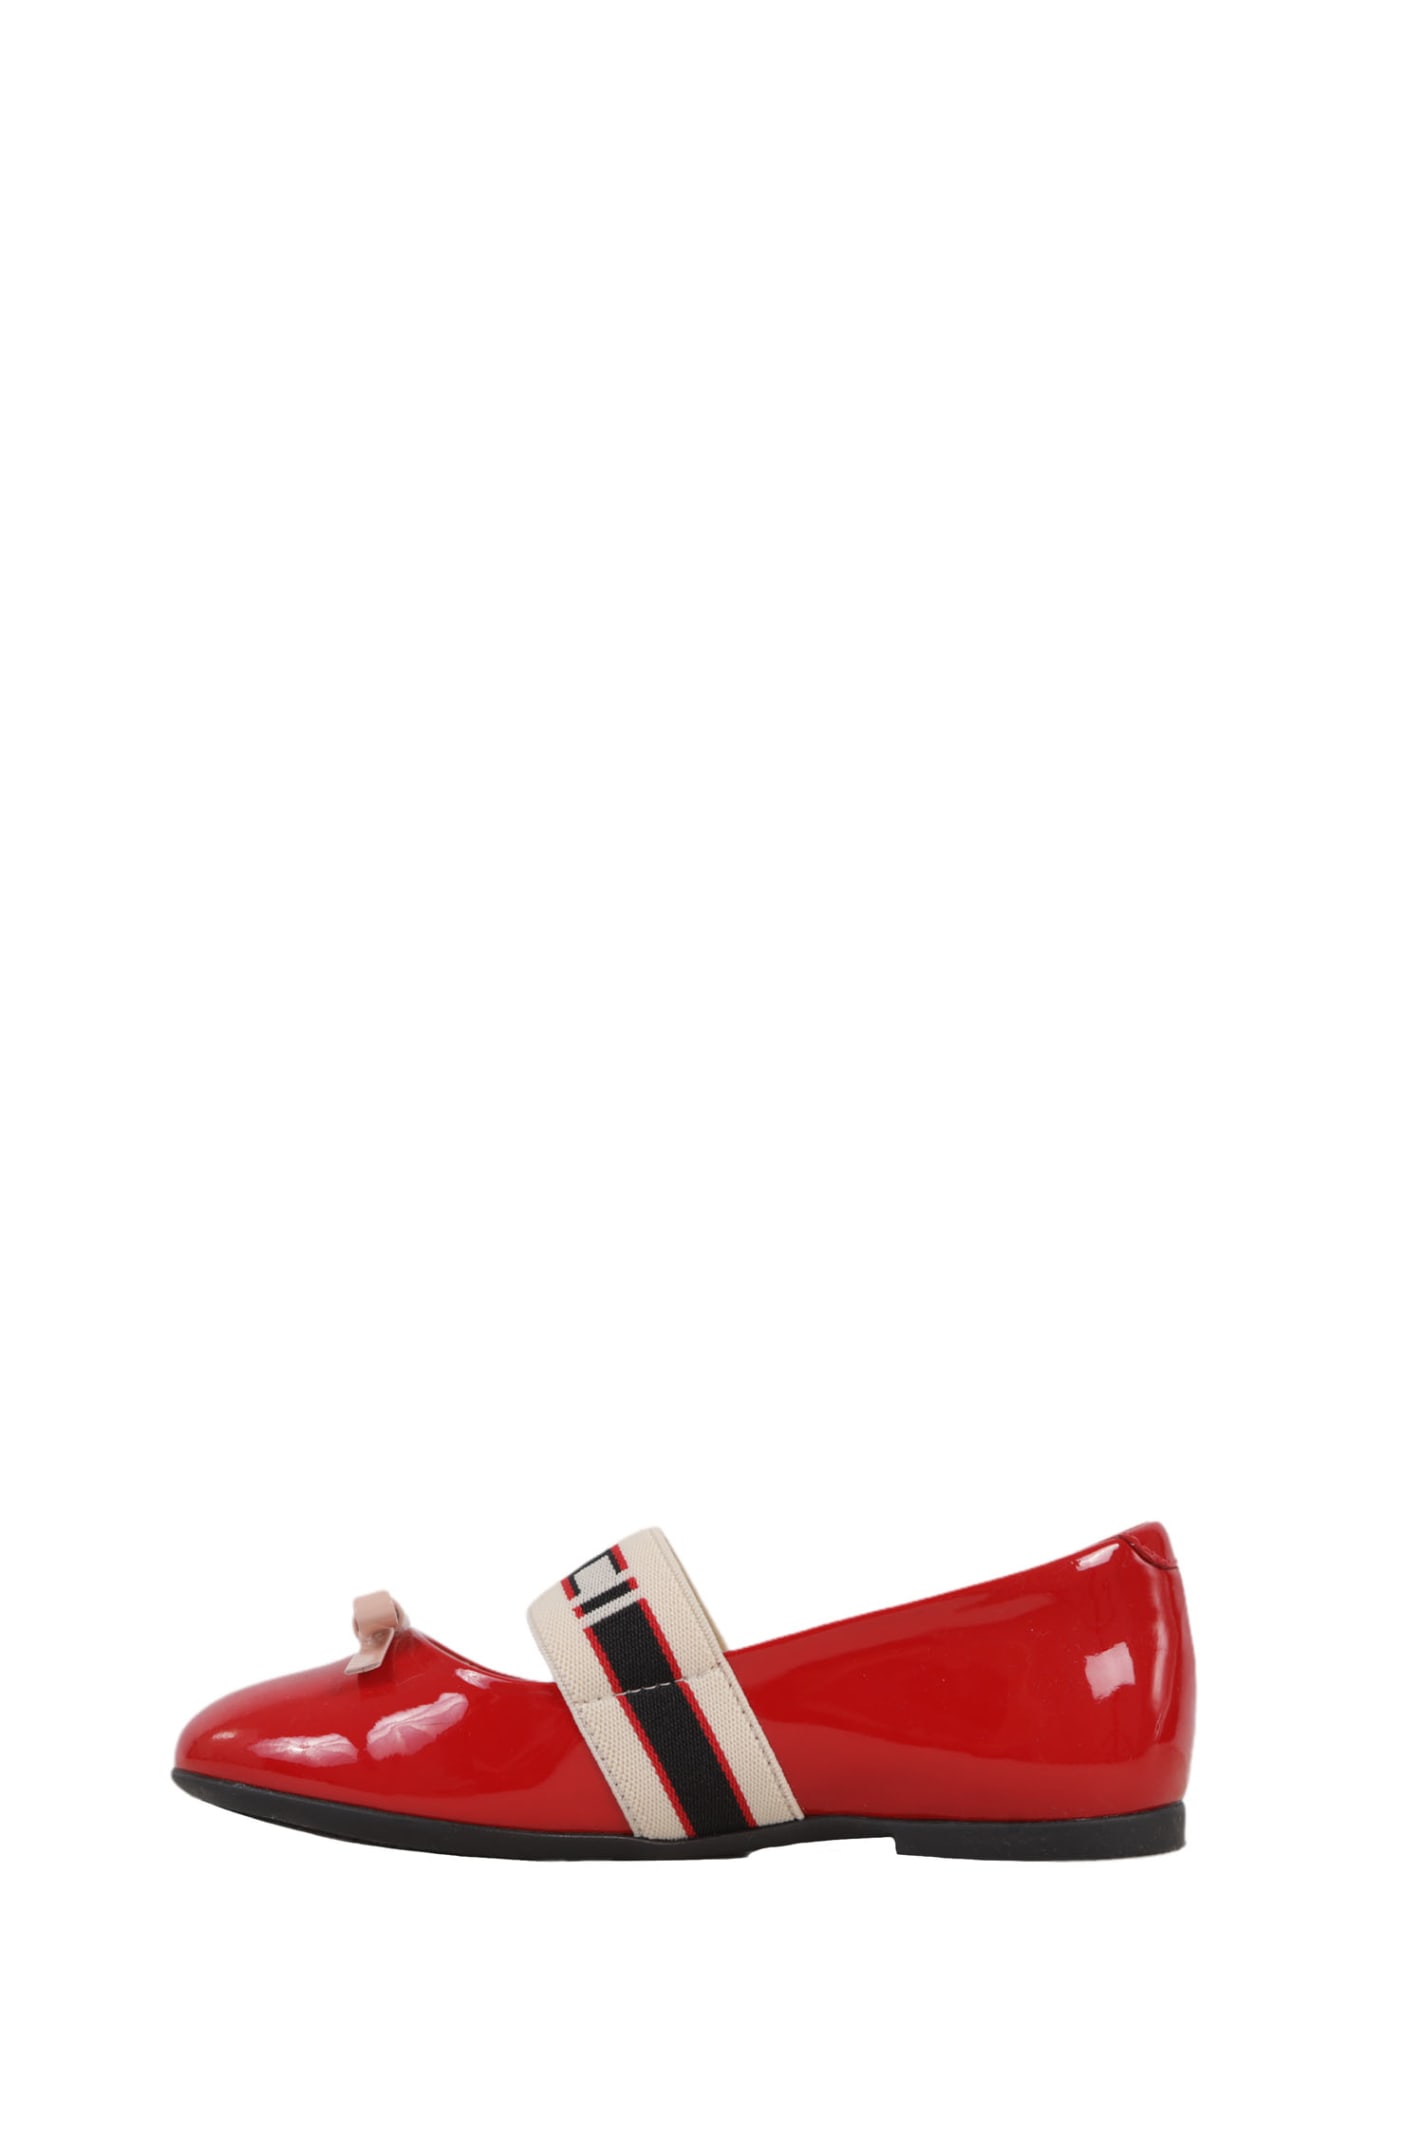 Shop Gucci Patent Leather Ballet Flat In Red